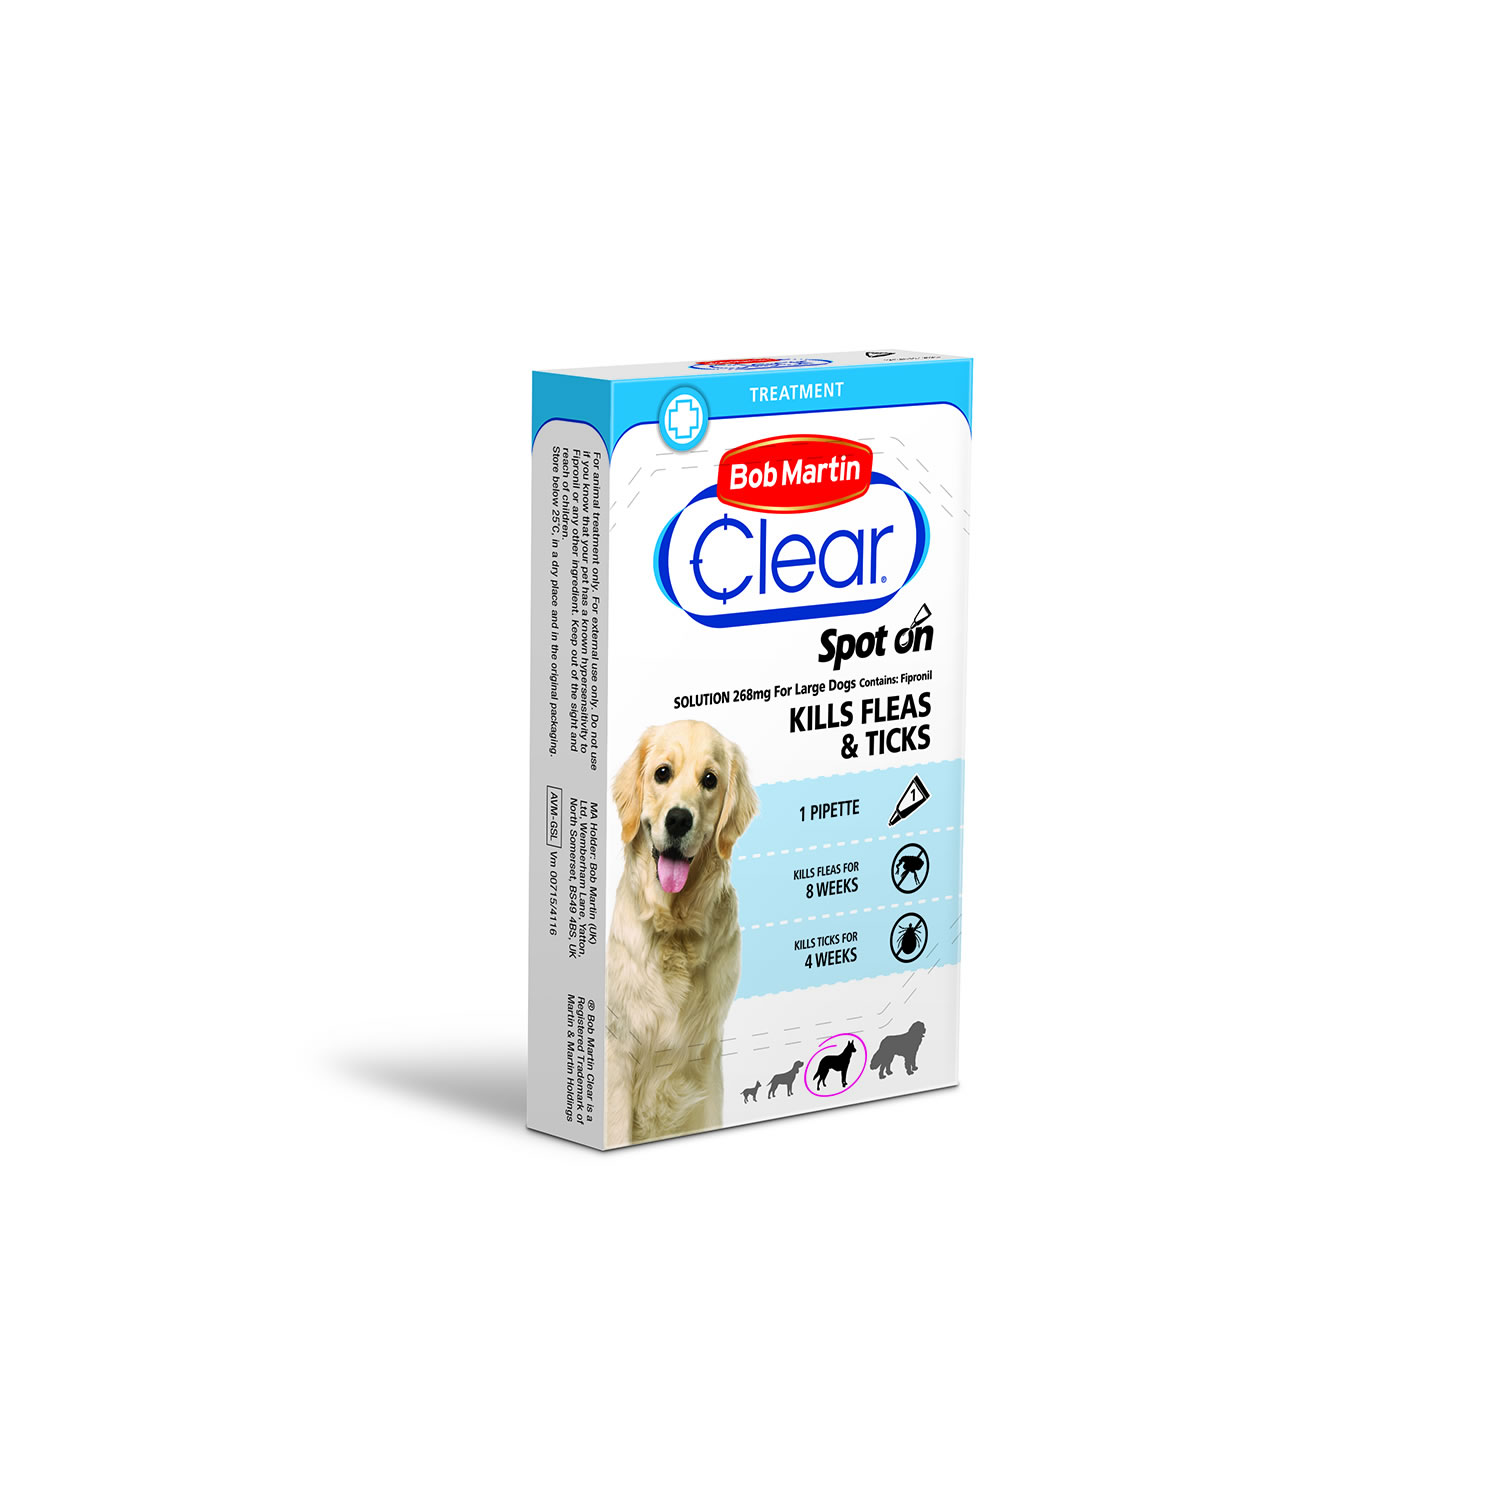 BOB MARTIN CLEAR SPOT ON FOR LARGE DOGS 20-40KG BOB MARTIN CLEAR SPOT ON FOR LARGE DOGS 20-40KG 1 TUBE  1 TUBE